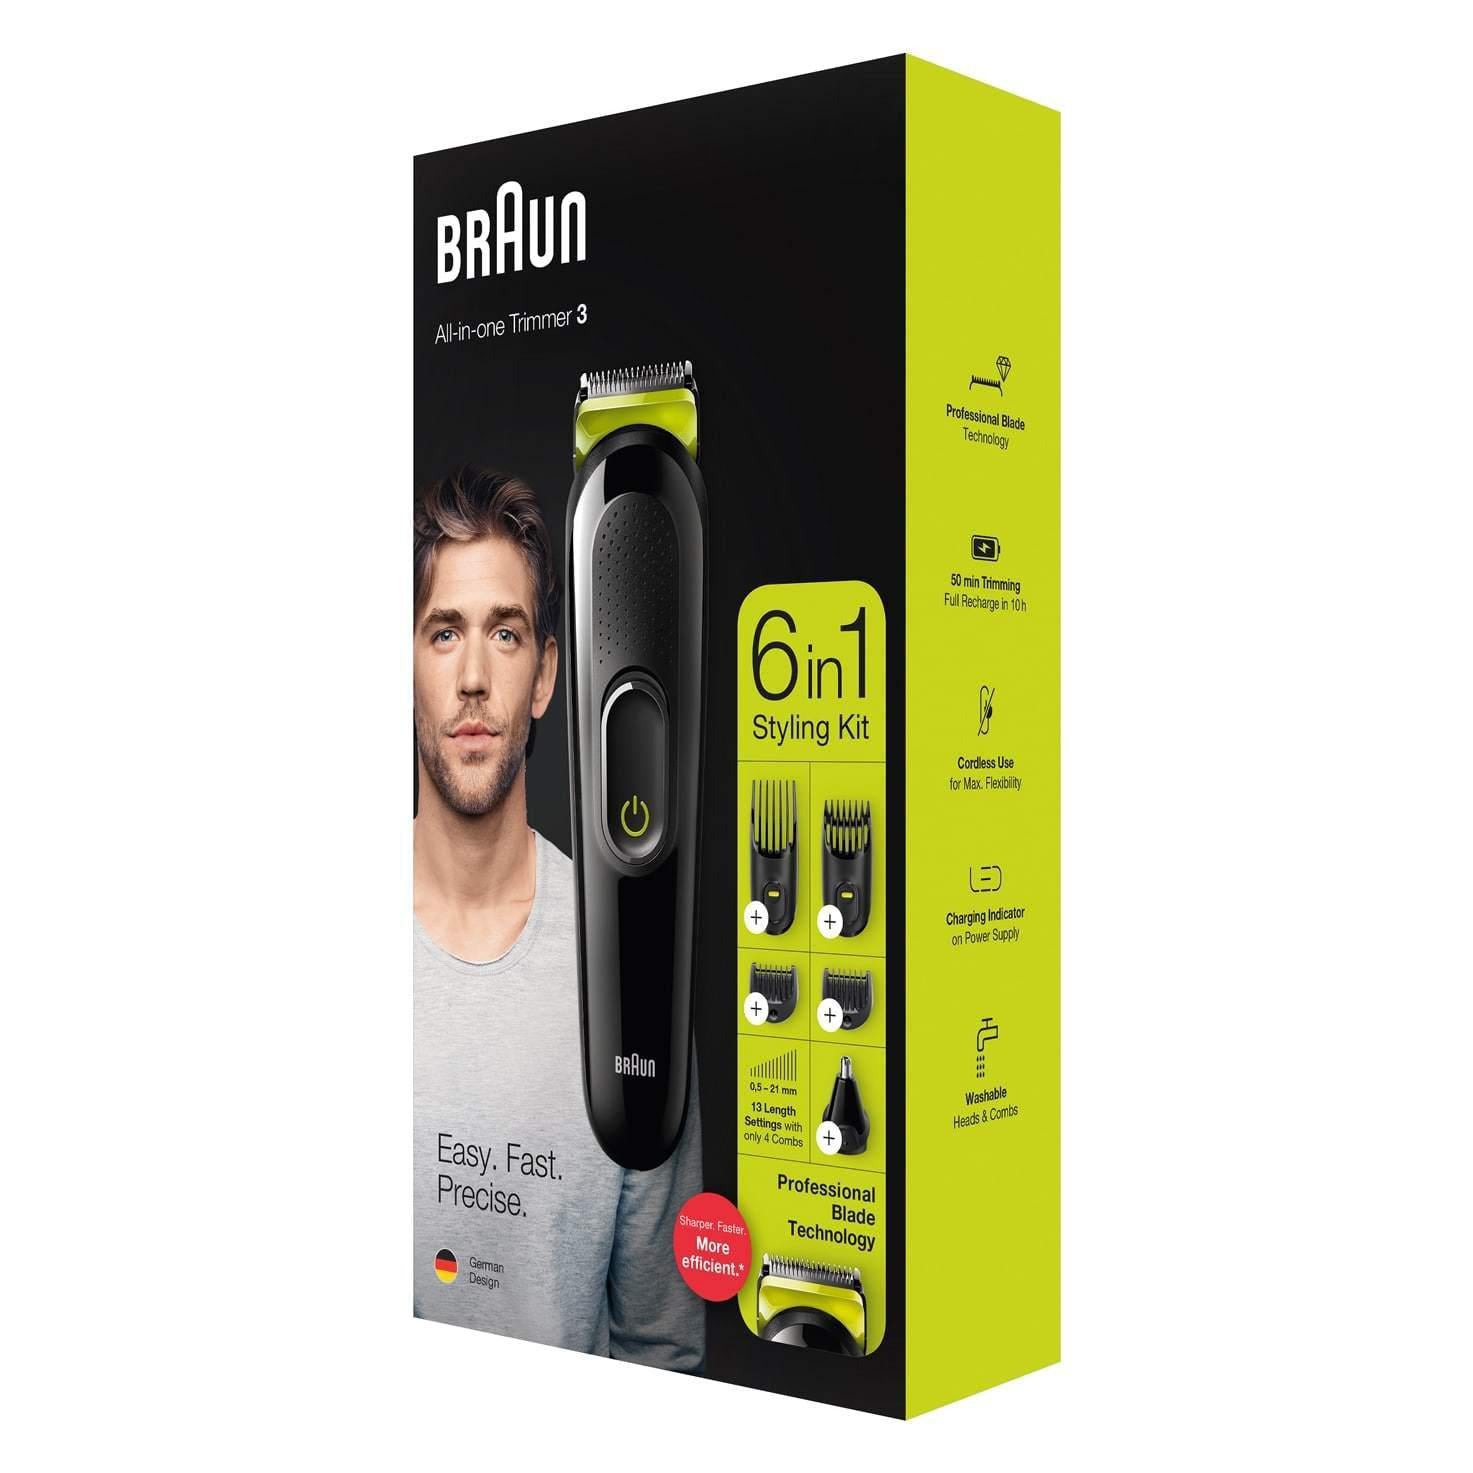 Braun Men's MGK3221 All-In-One Trimmer - 6-in-1 Styling Kit with 5 Attachments - Healthxpress.ie